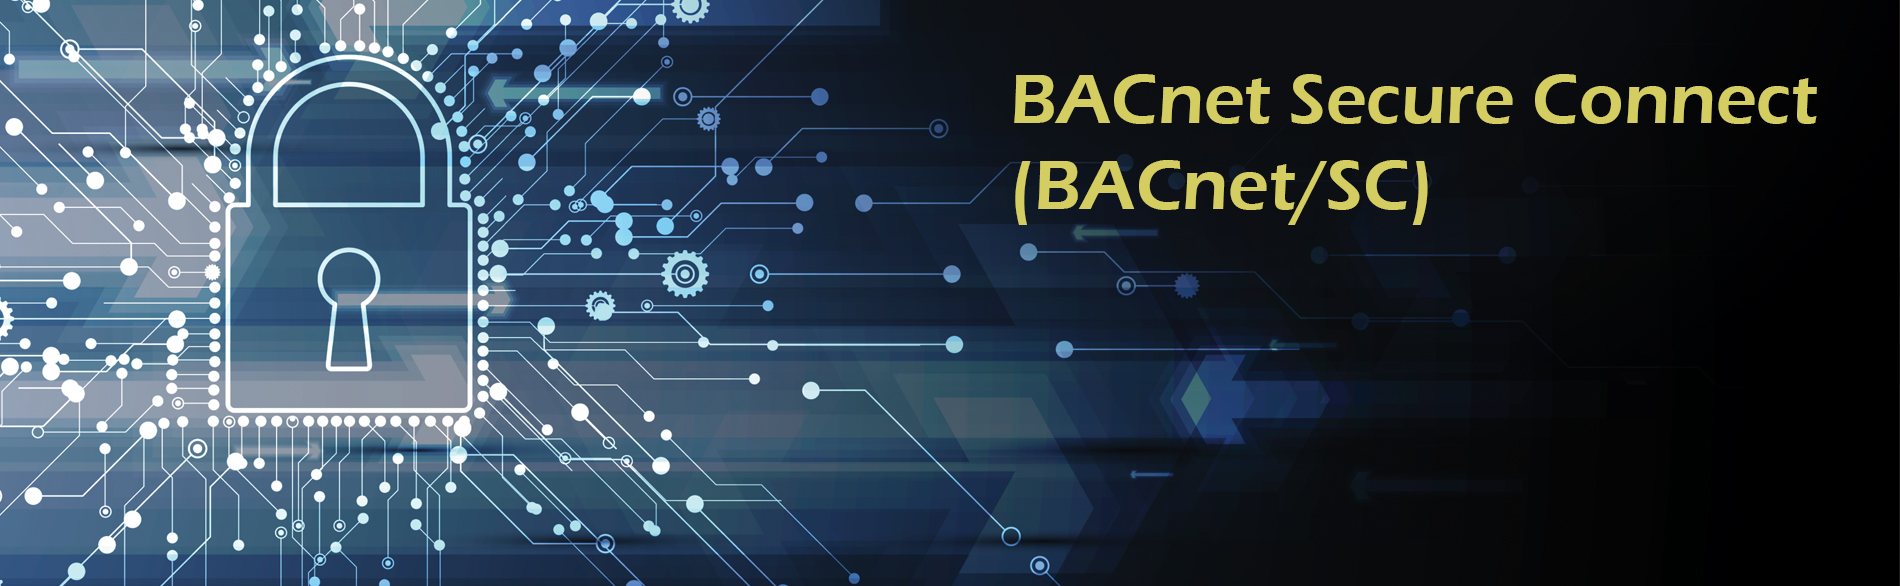 BACnet Secure Connect Video Introduction